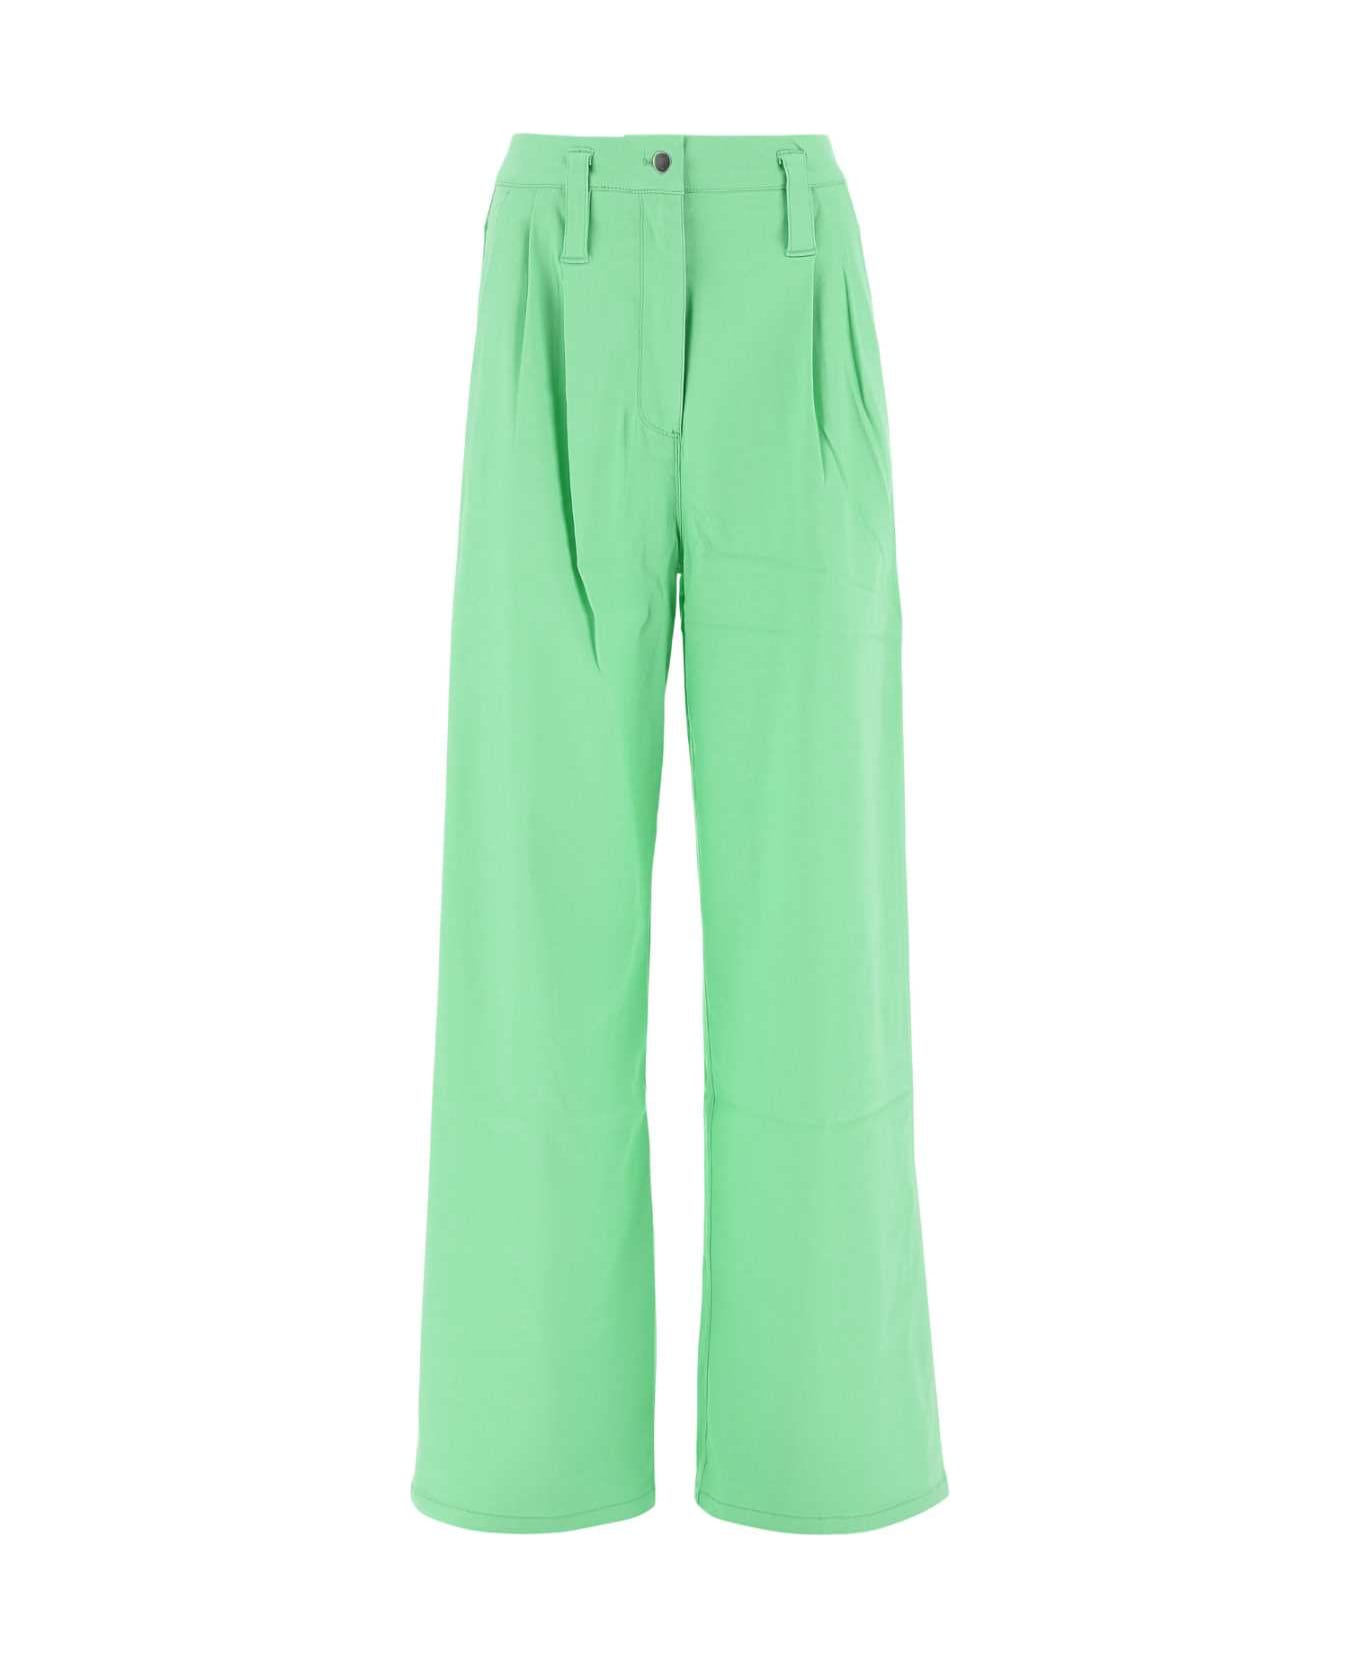 Rotate by Birger Christensen Fluo Green Stretch Viscose Blend Pants - 146340 ボトムス